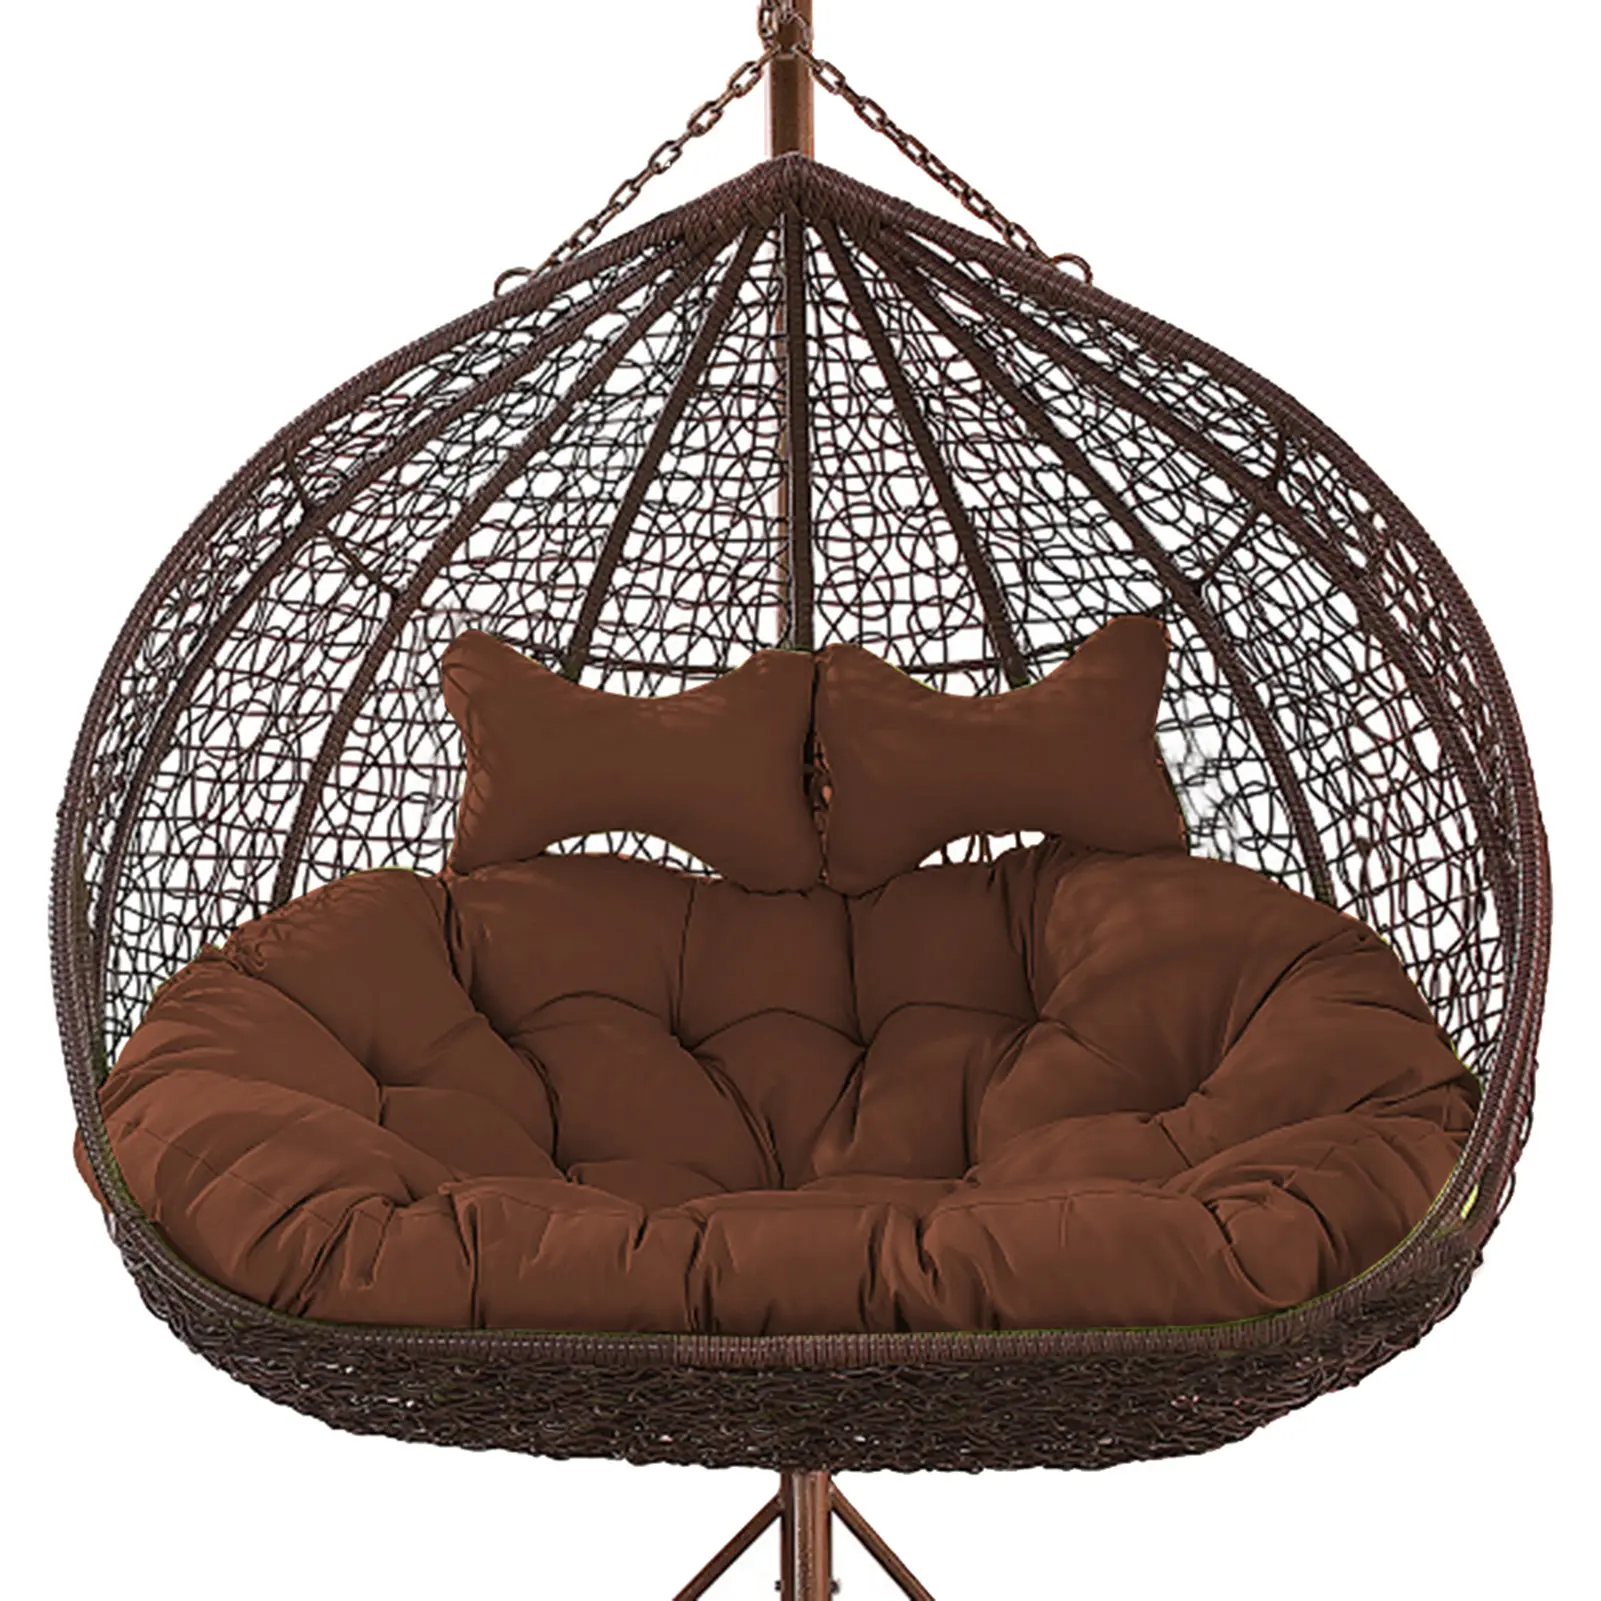 Low Price Egg Swing Chair Wholesale Quality Outdoor Furniture Patio Garden Hanging Double Swings Seat Rattan Wicker Swing Chairs